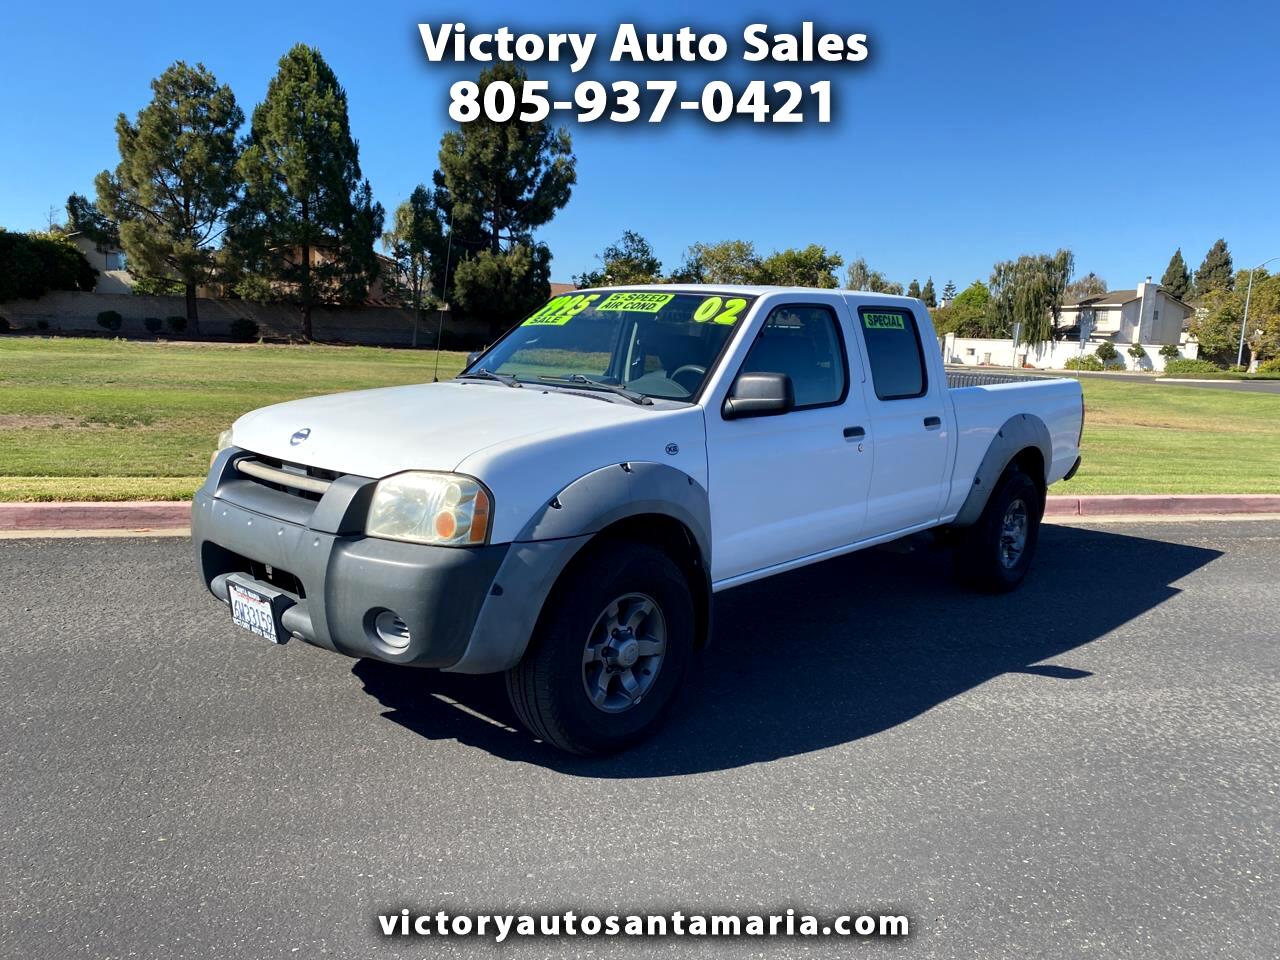 Used 2002 Nissan Frontier XE-V6 Crew Cab Long Bed 2WD for Sale in Santa Maria CA 93455 Victory 2002 Nissan Frontier Crew Cab Long Bed